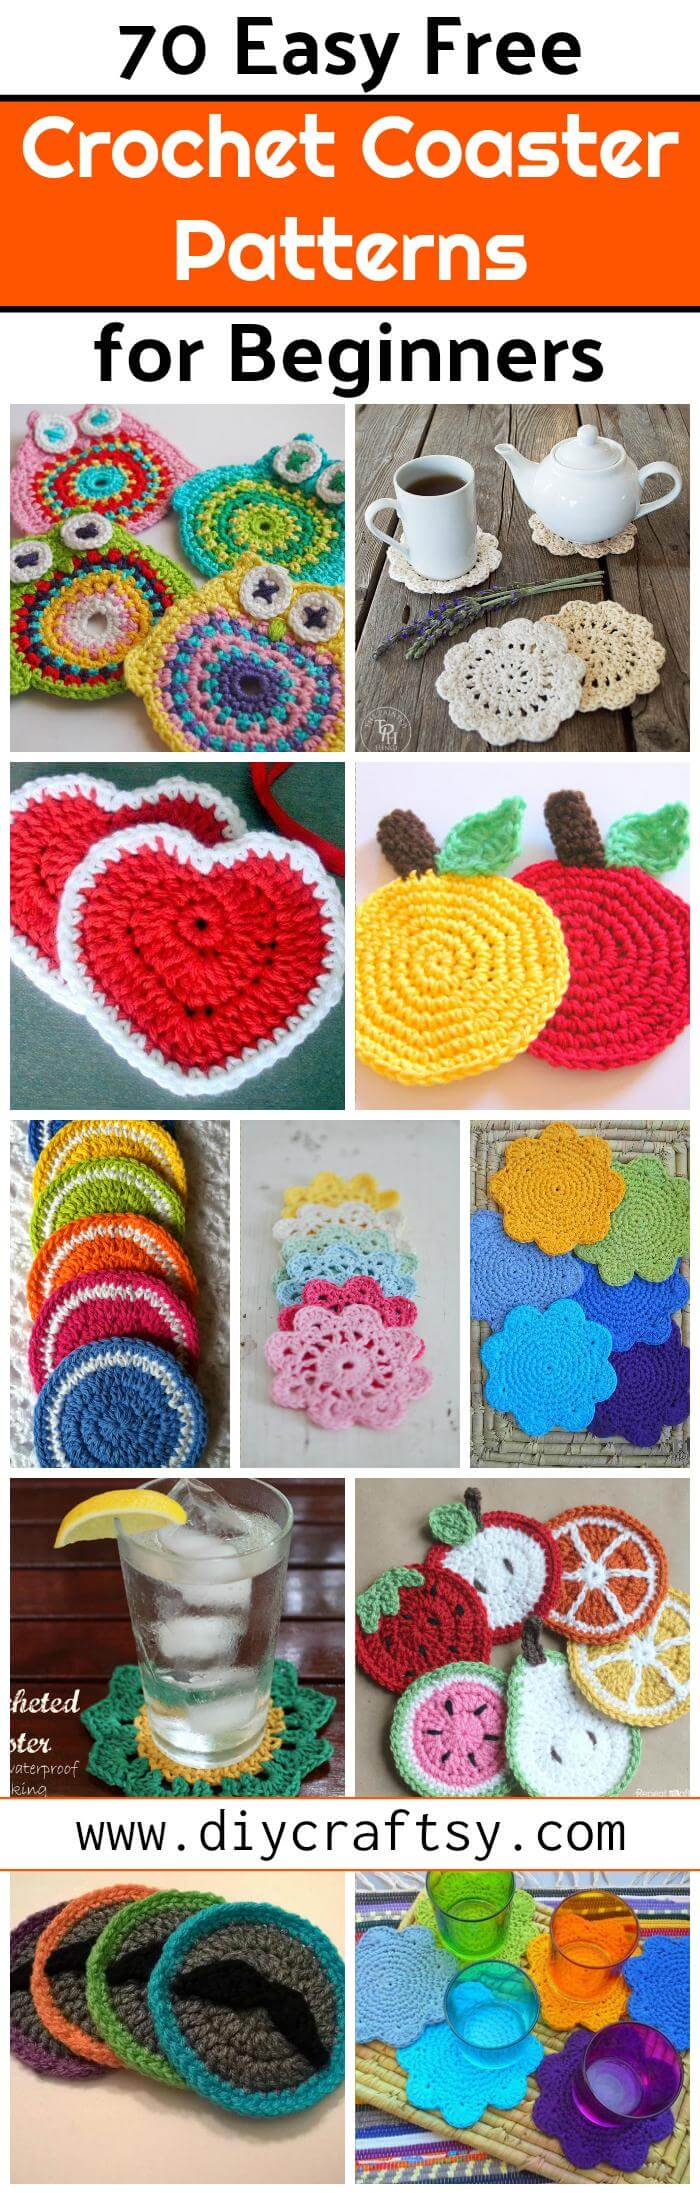 Crochet For Beginners Patterns Free 70 Easy Free Crochet Coaster Patterns For Beginners Diy Crafts